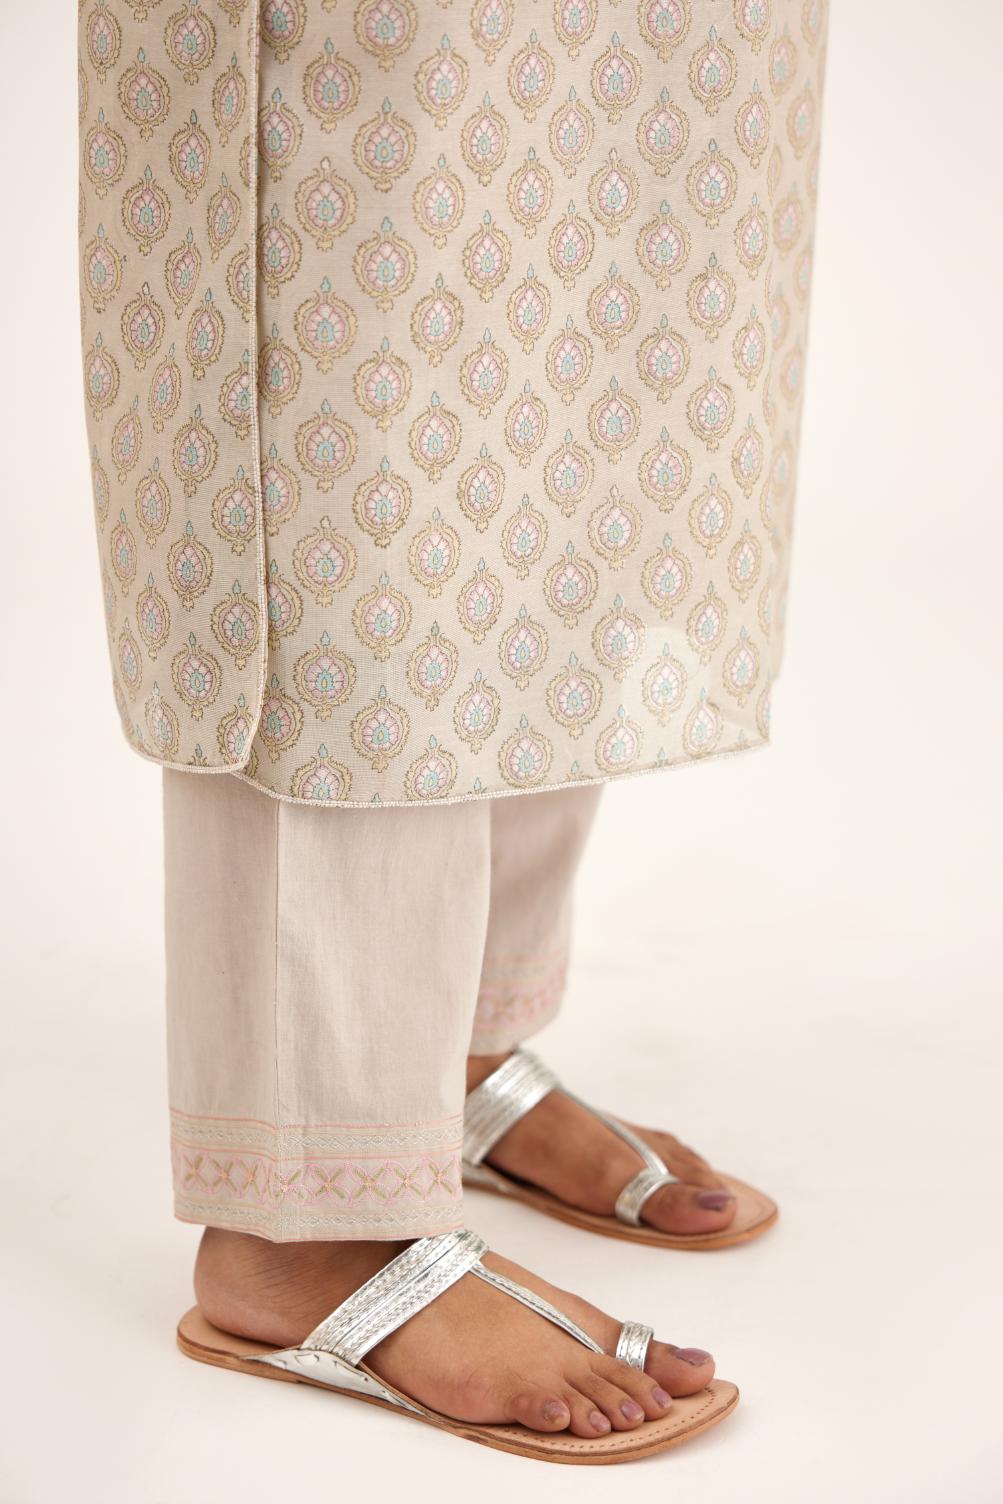 Grey silk chanderi straight kurta set with all-over hand block print and silver bugle beads detailing.